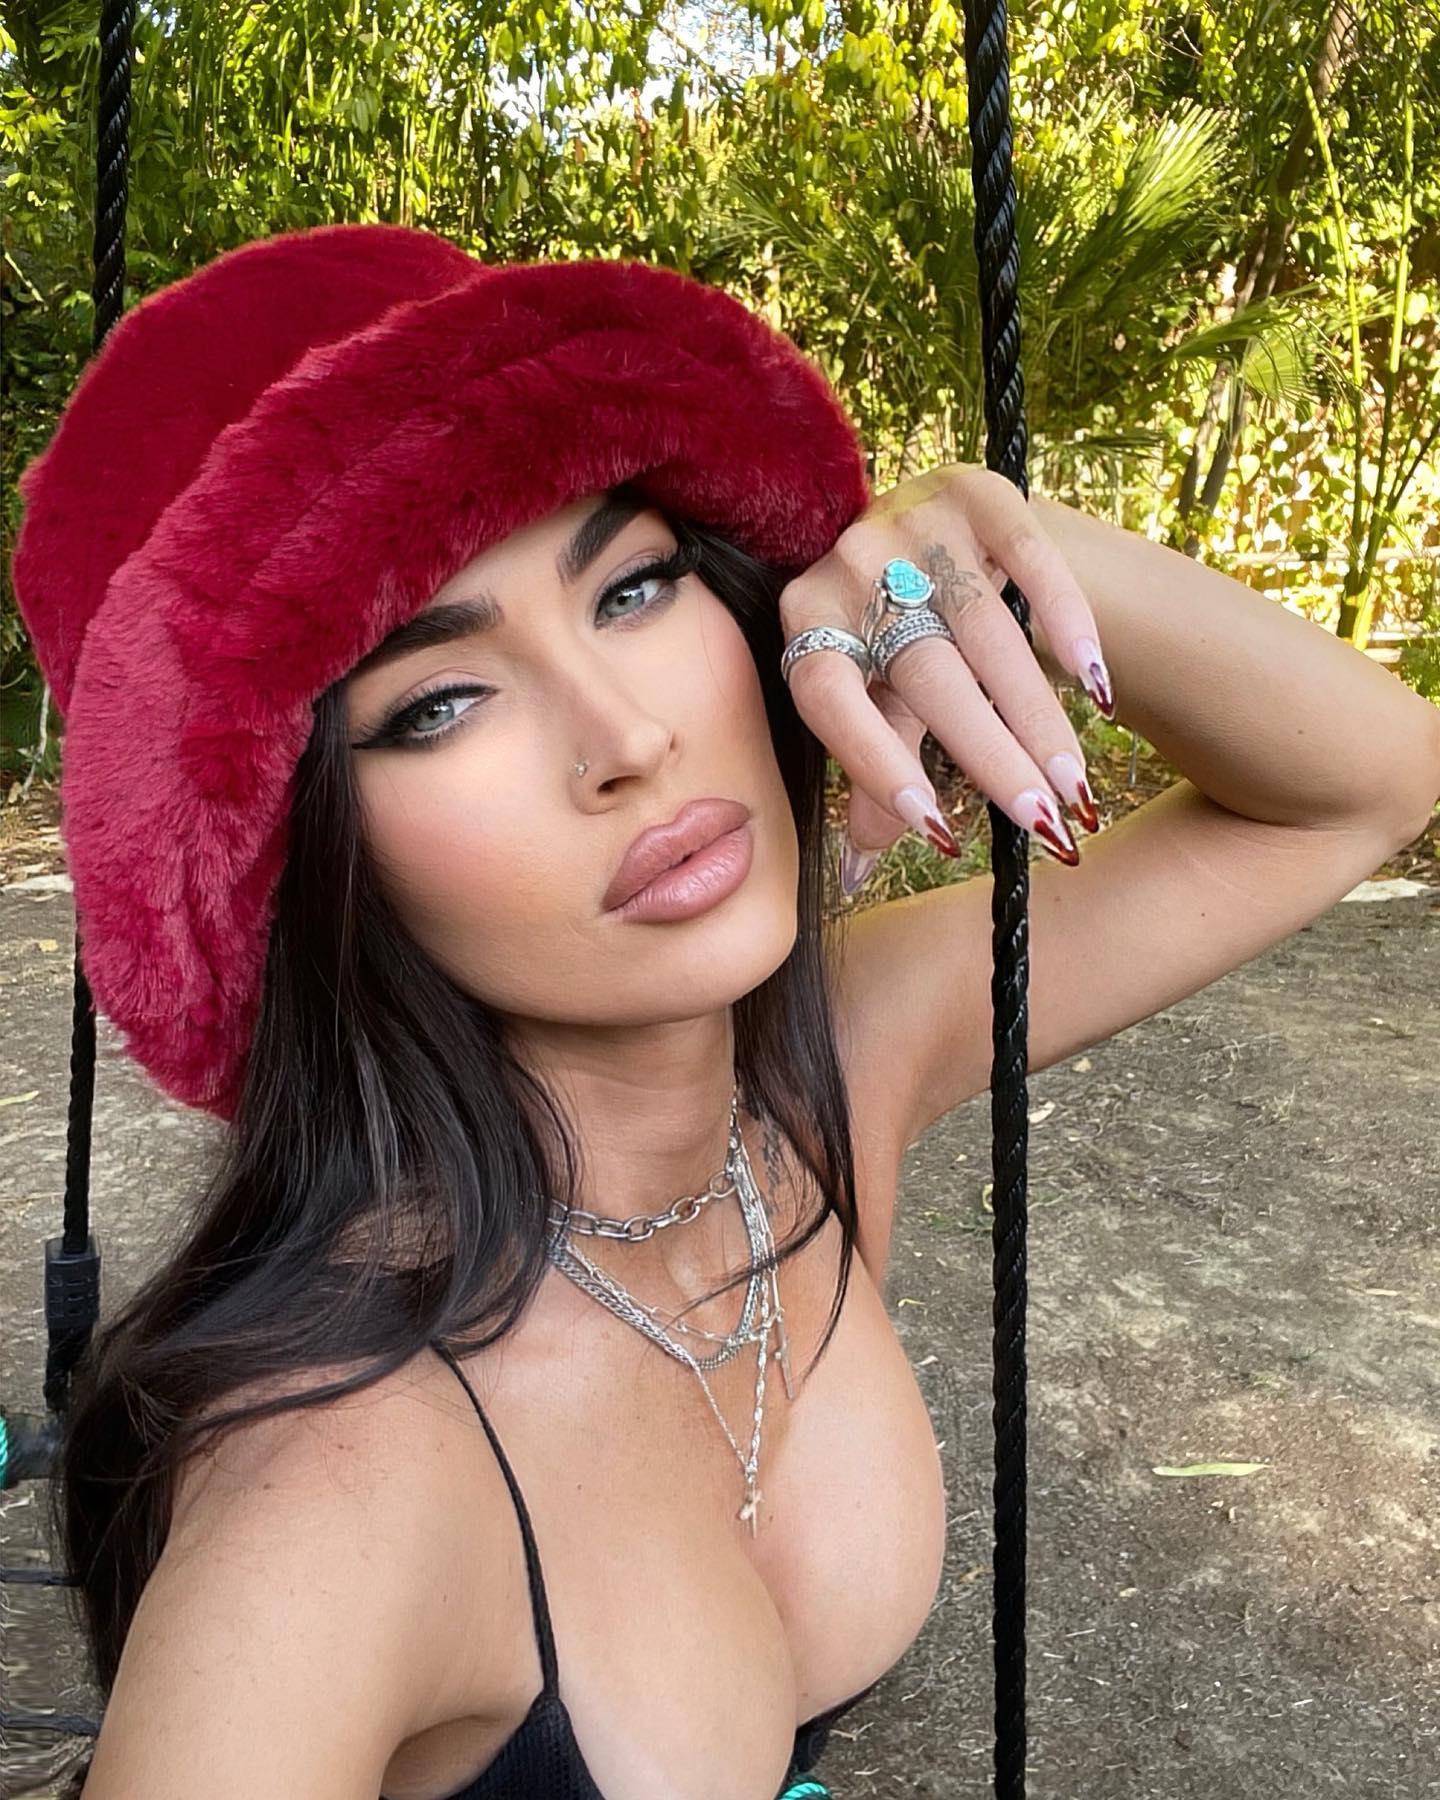 Megan Fox shares a selfie in a black top and red hat